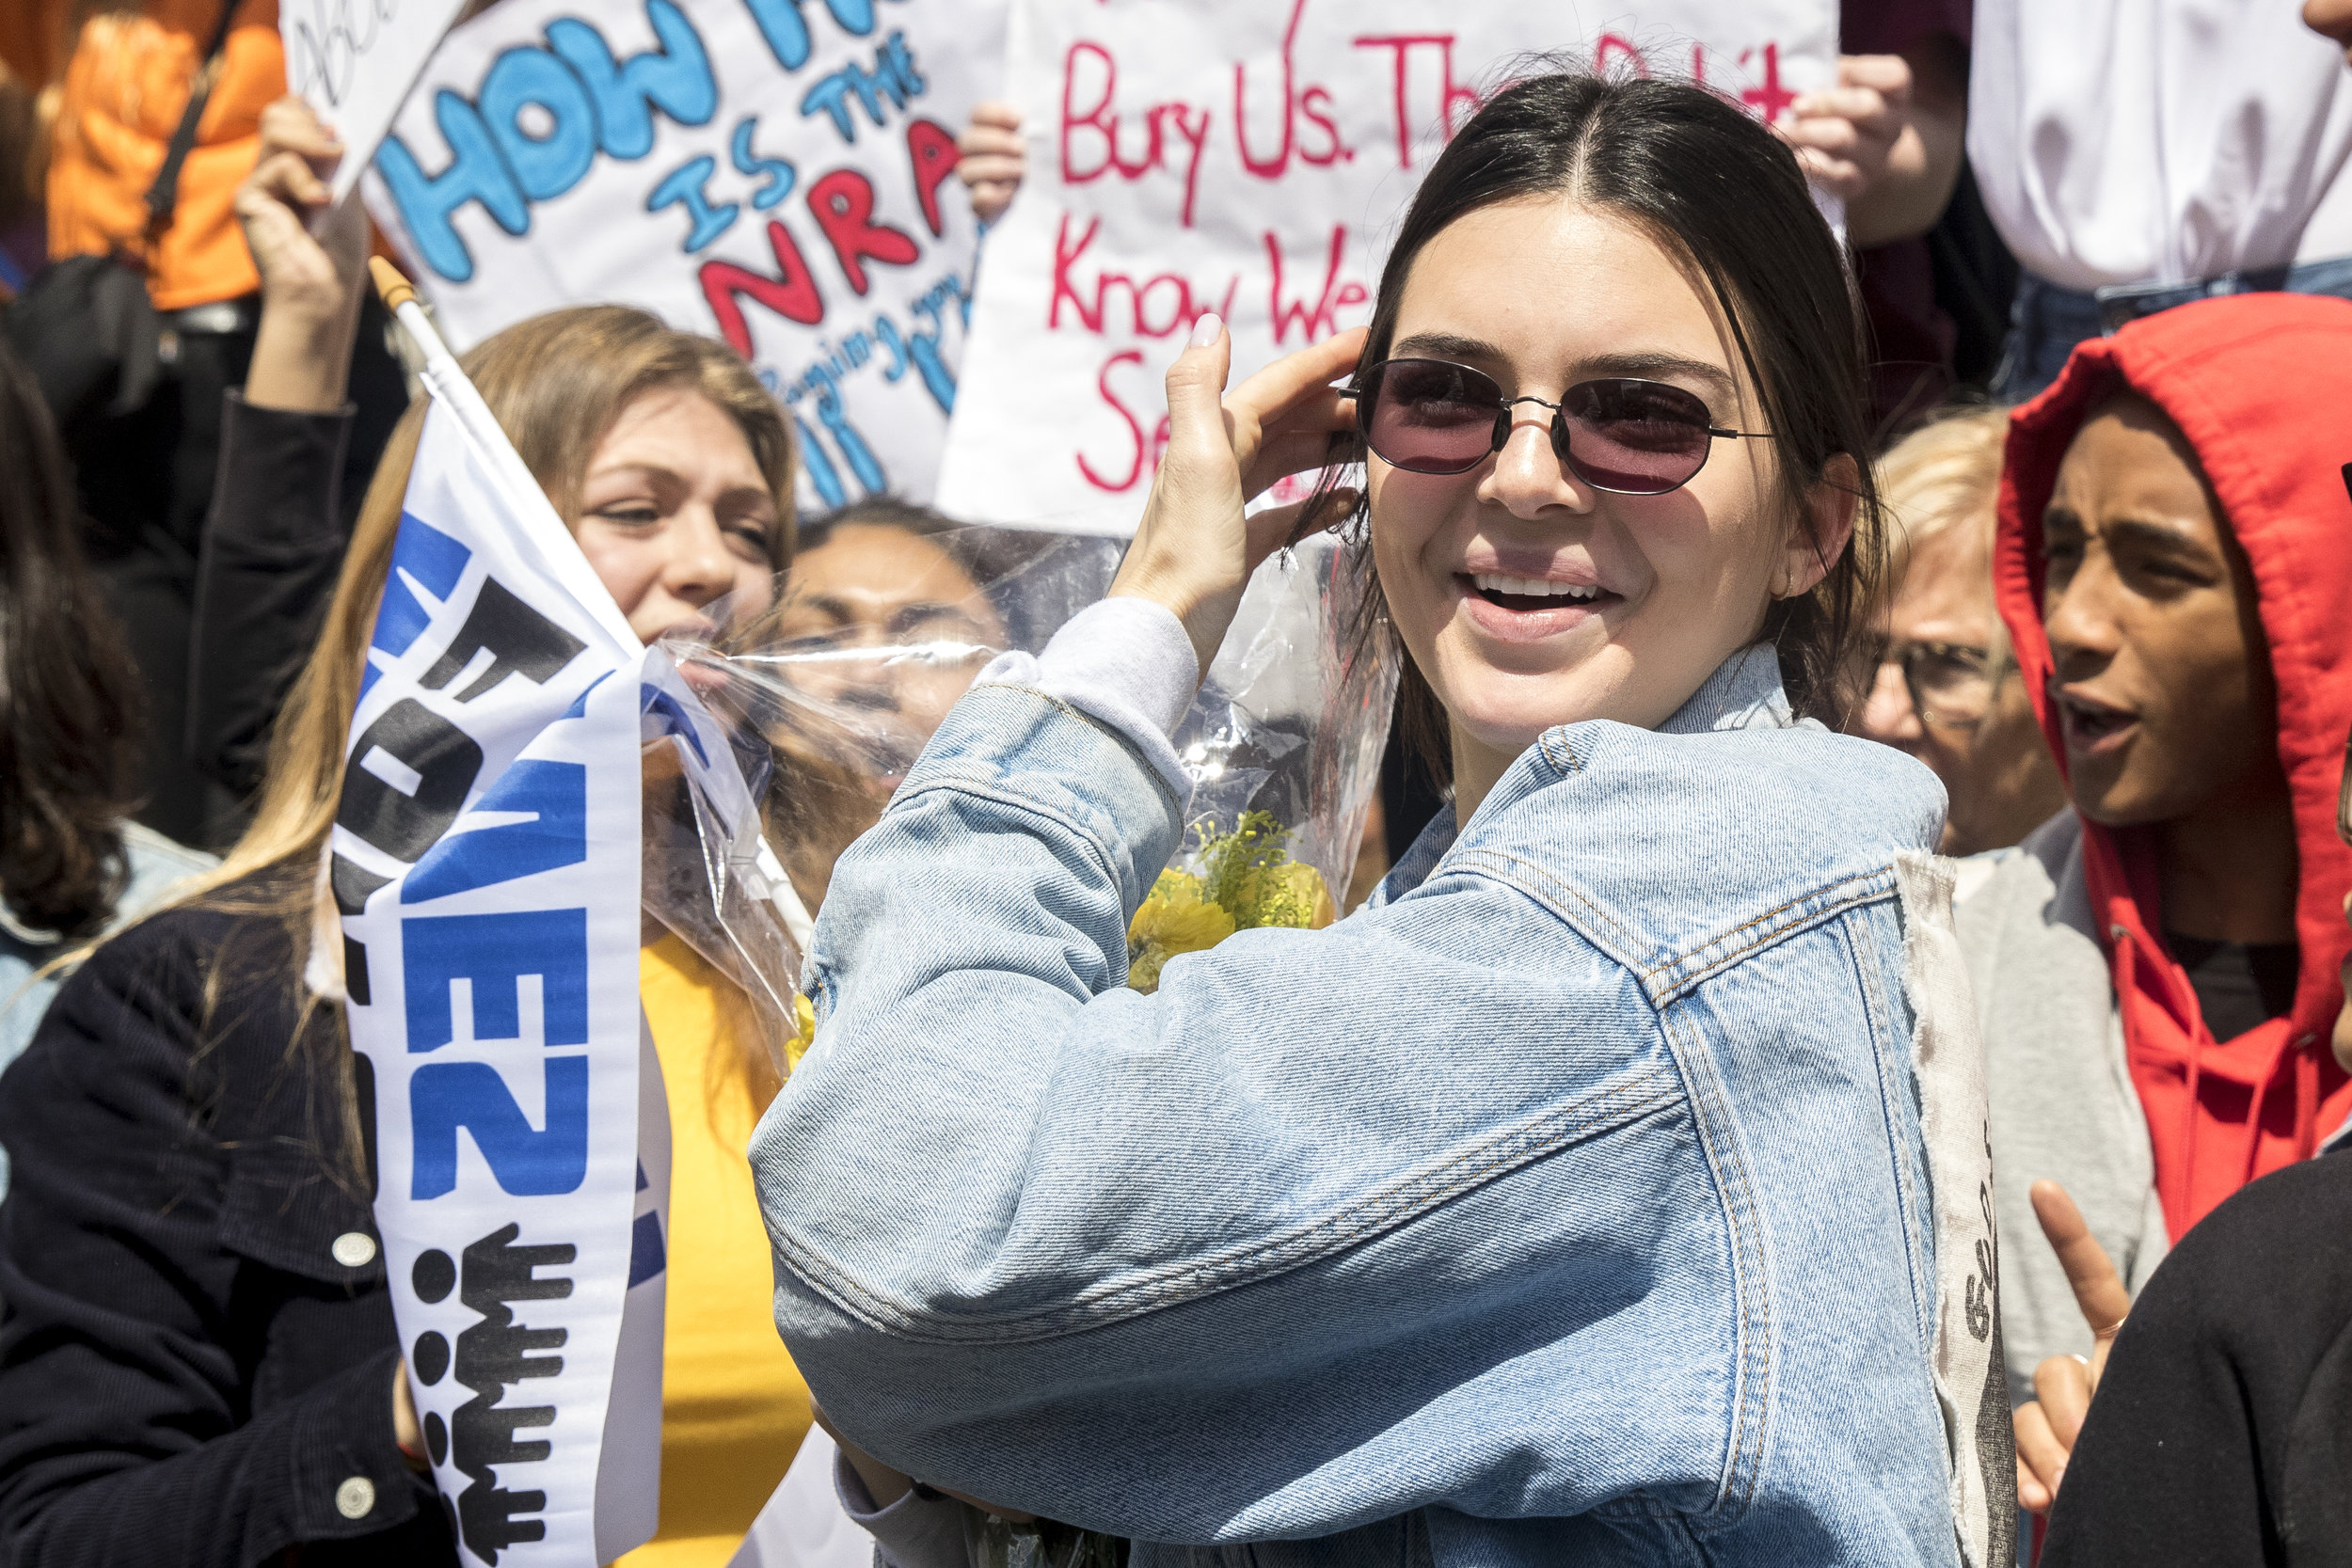  Kendall Jenner joins the crowd at March For Our Lives on March 24, 2018 in Los Angeles, California. Jenner was one of many celebrities in attendance that day. (Zane Meyer-Thornton/Corsair Photo) 